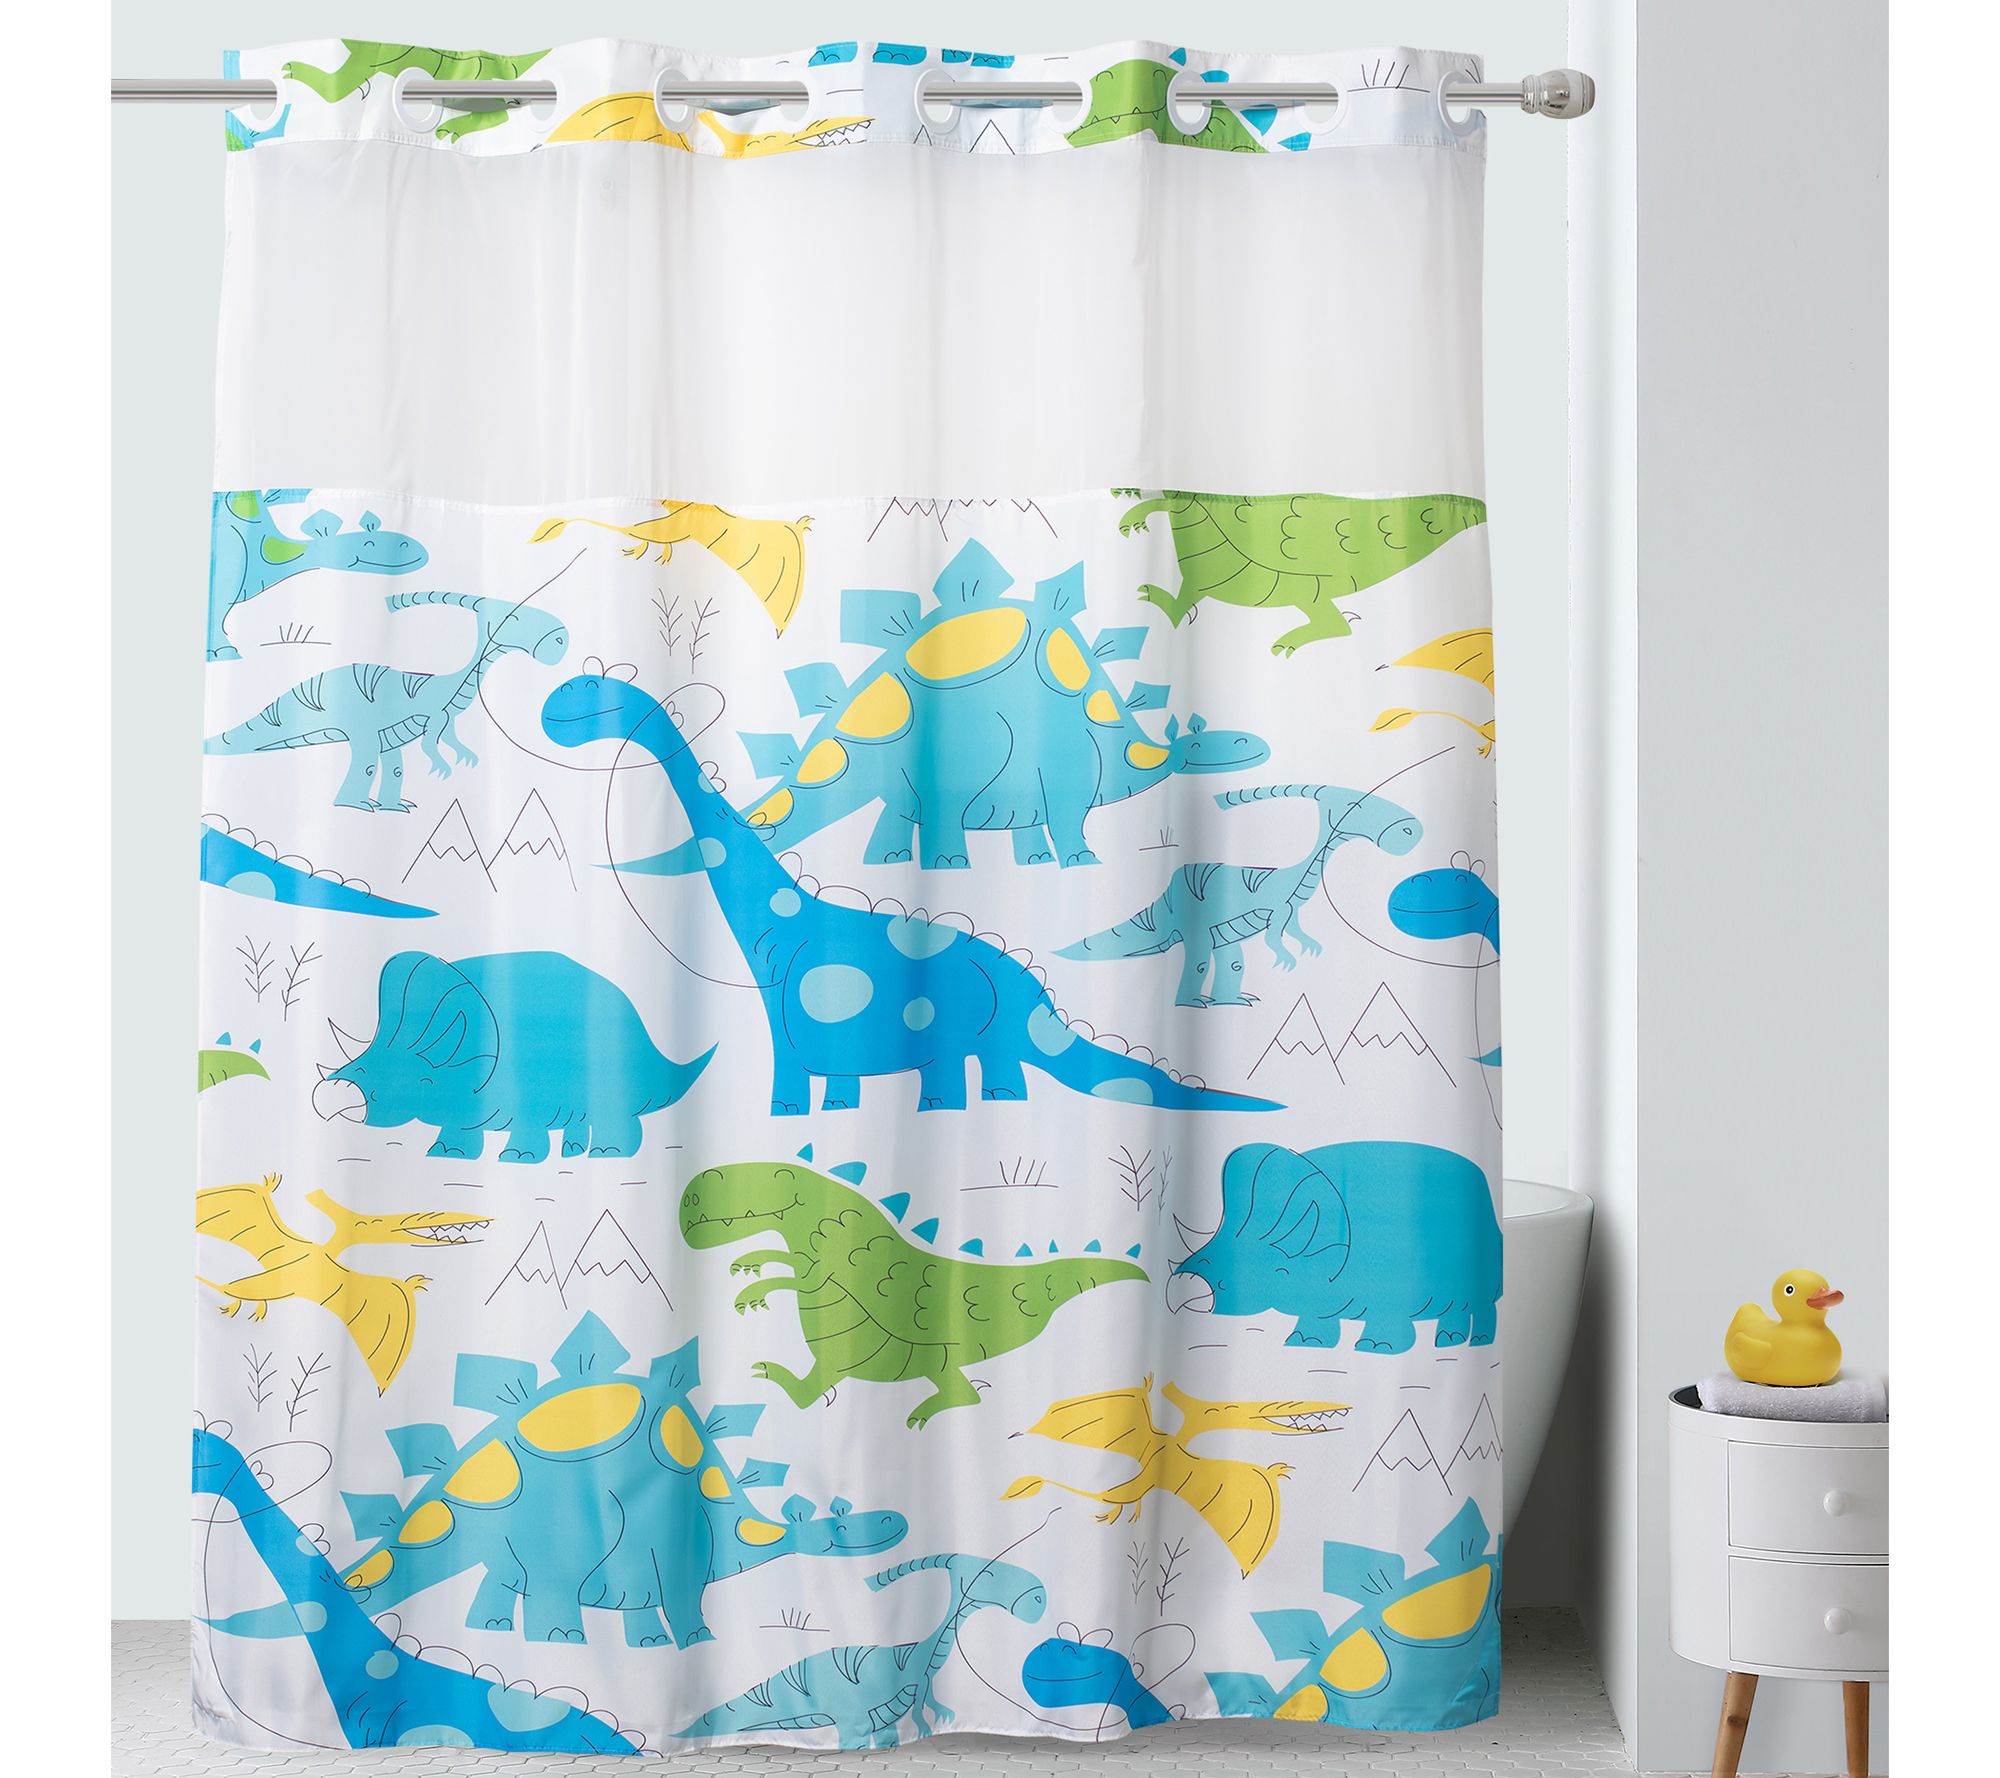 Hookless Shower Curtain For Kids, Qvc Shower Curtains